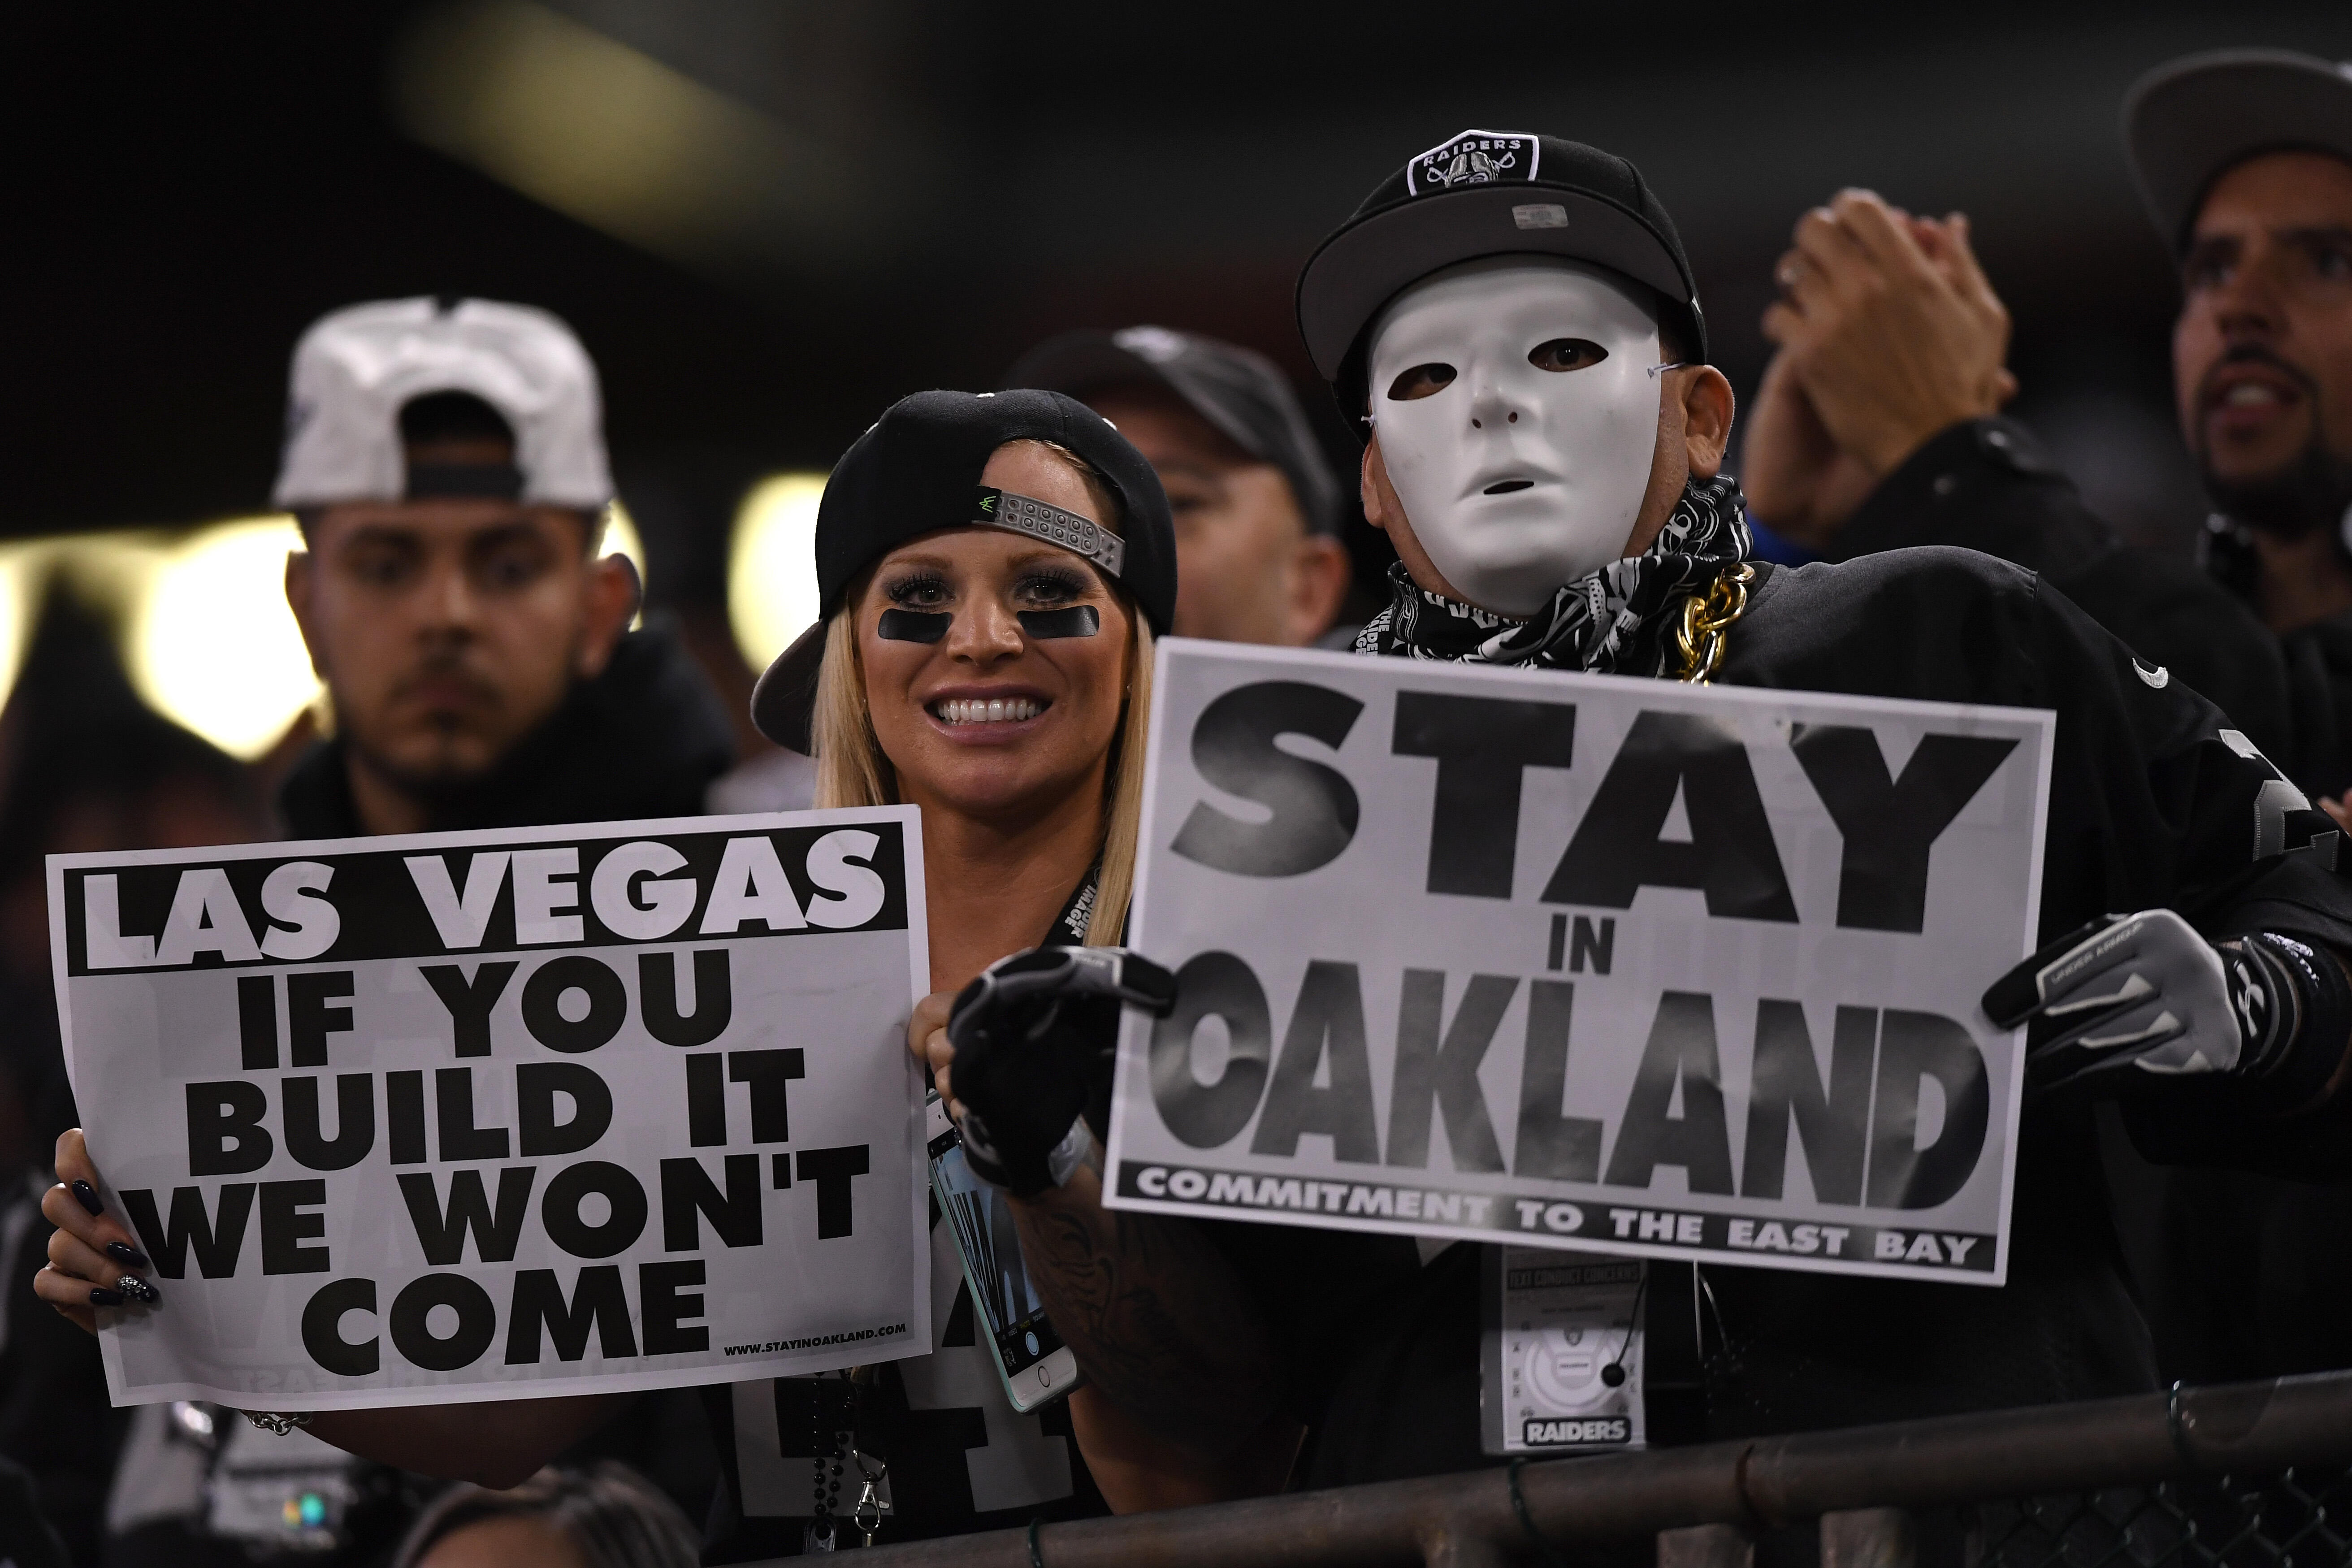 OAKLAND, CA - NOVEMBER 06:   Oakland Raiders fans display signs in support of the team staying in Oakland during their game against the Denver Broncos at Oakland-Alameda County Coliseum on November 6, 2016 in Oakland, California. (Photo by Thearon W. Hend